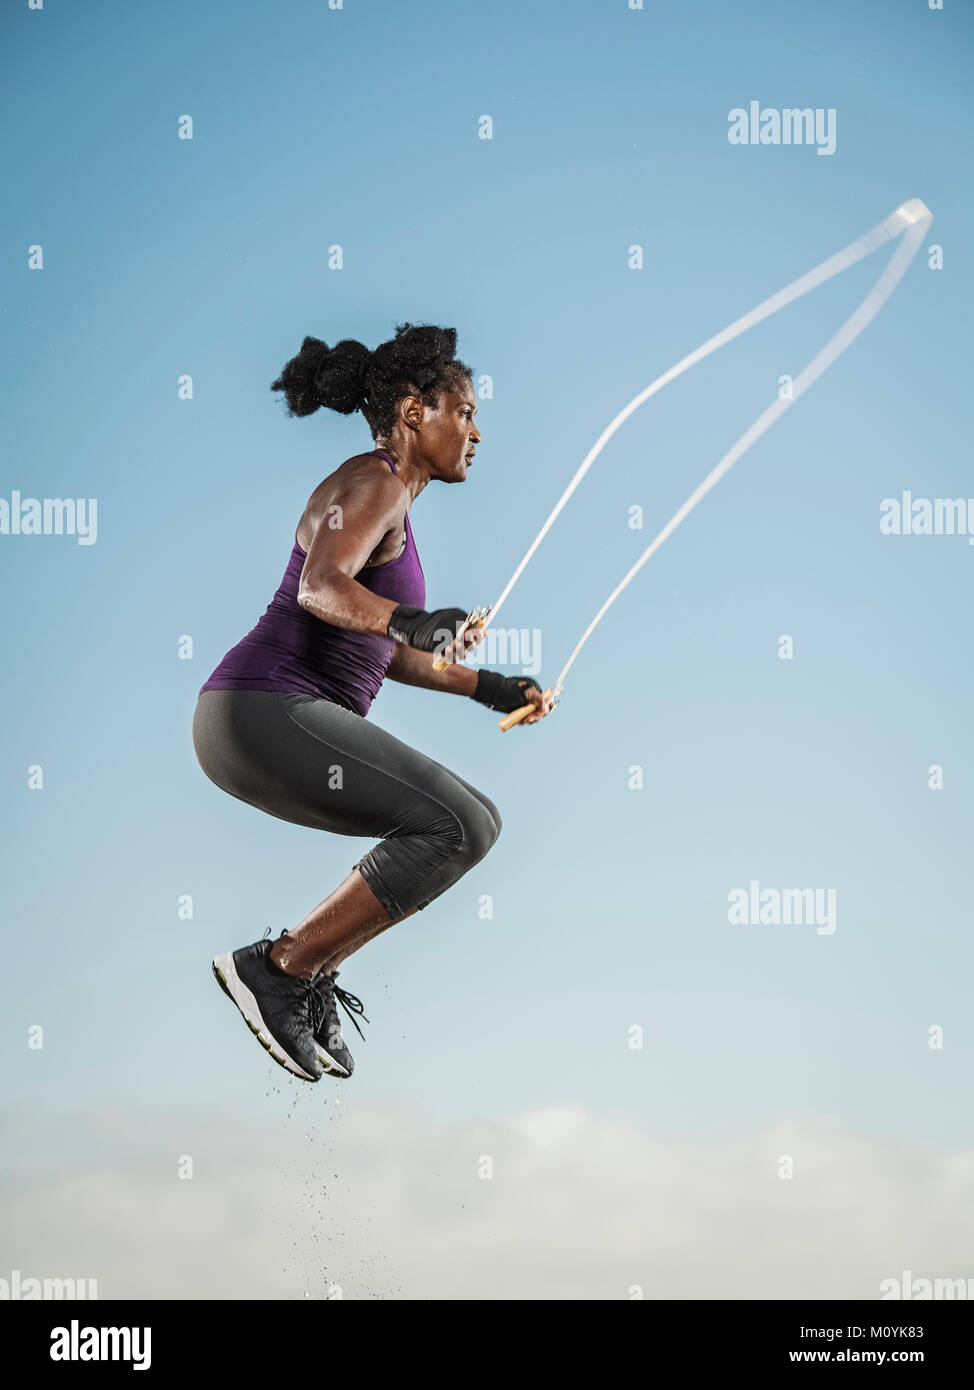 Black woman jumping rope in sky Banque D'Images